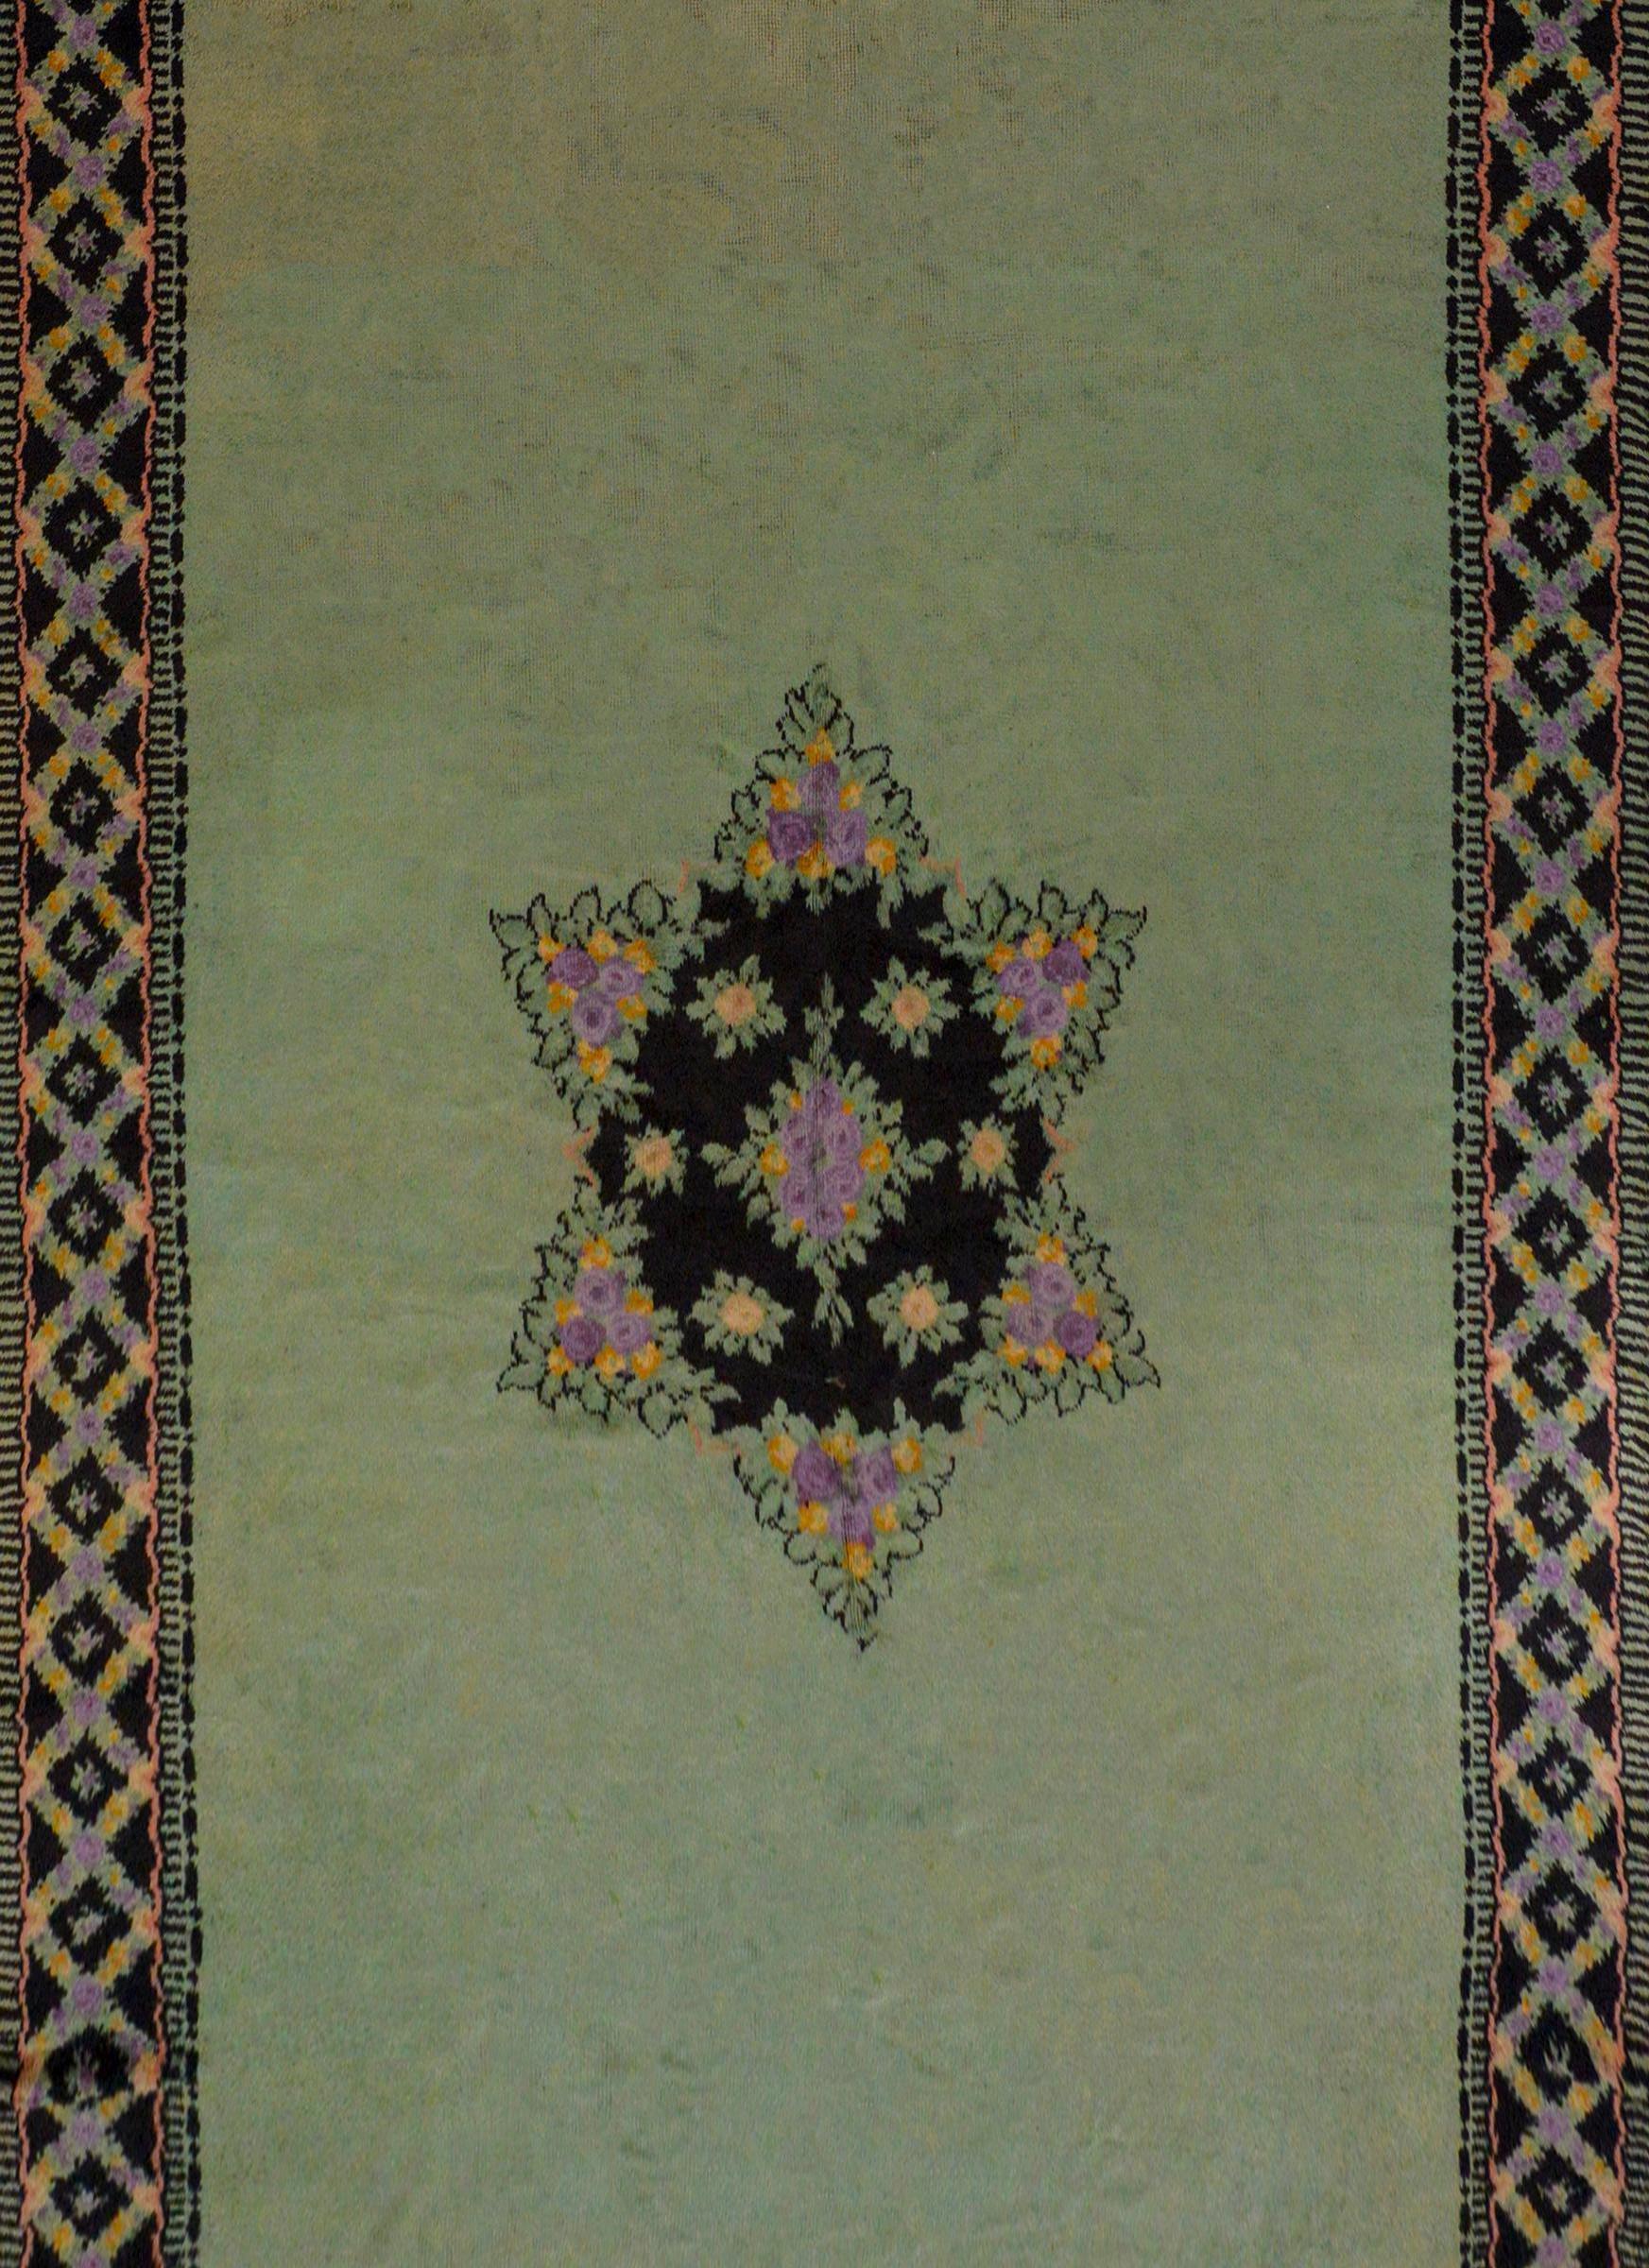 An unusual early 20th century Austrian rug with a large Star of David in the center formed from clusters of lavender and orange roses arranged in a garden pattern, on a wonderful solid mint green field. The border is styled with similar roses as the